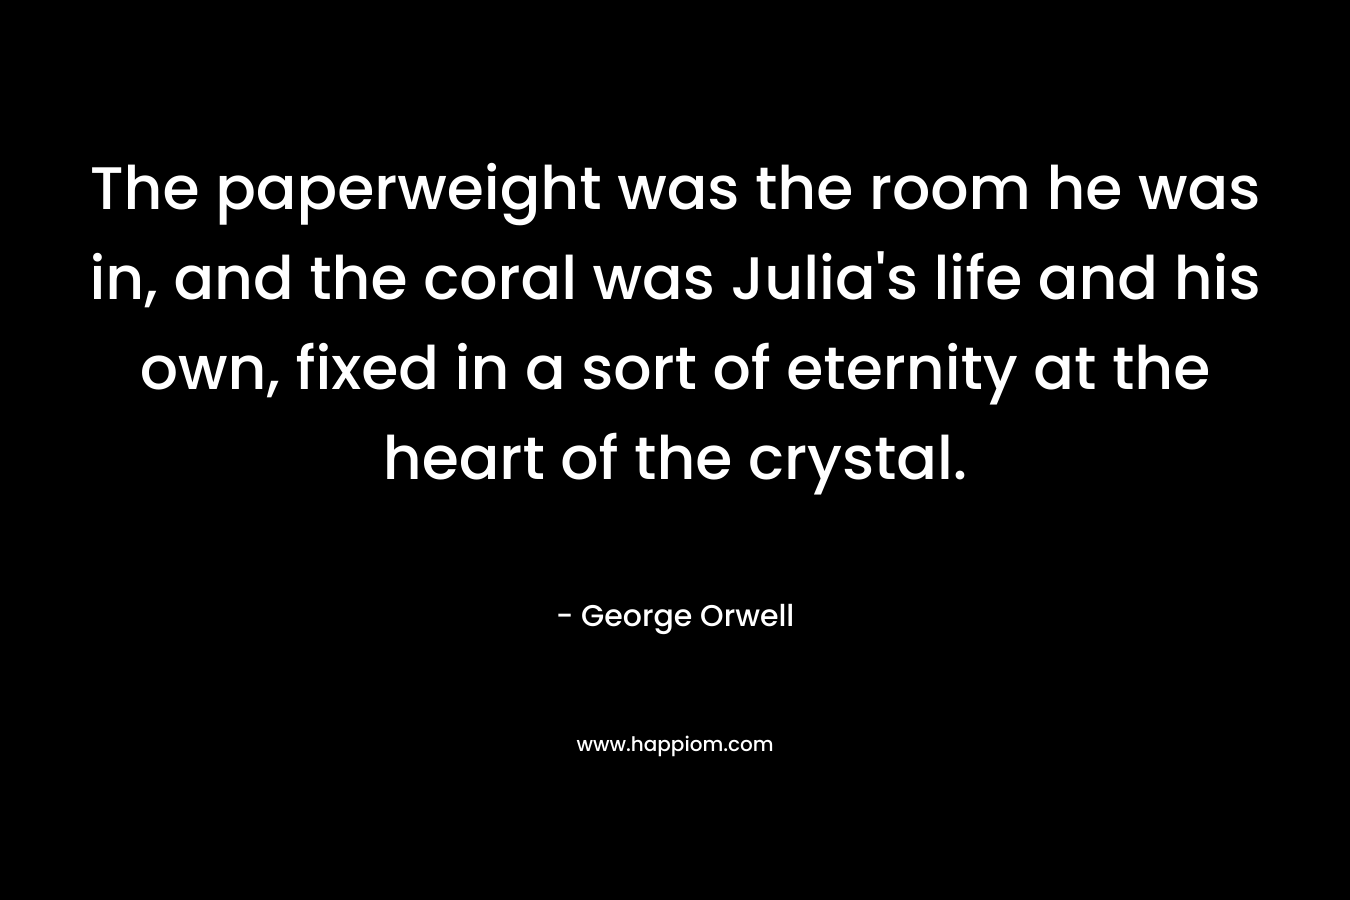 The paperweight was the room he was in, and the coral was Julia's life and his own, fixed in a sort of eternity at the heart of the crystal.